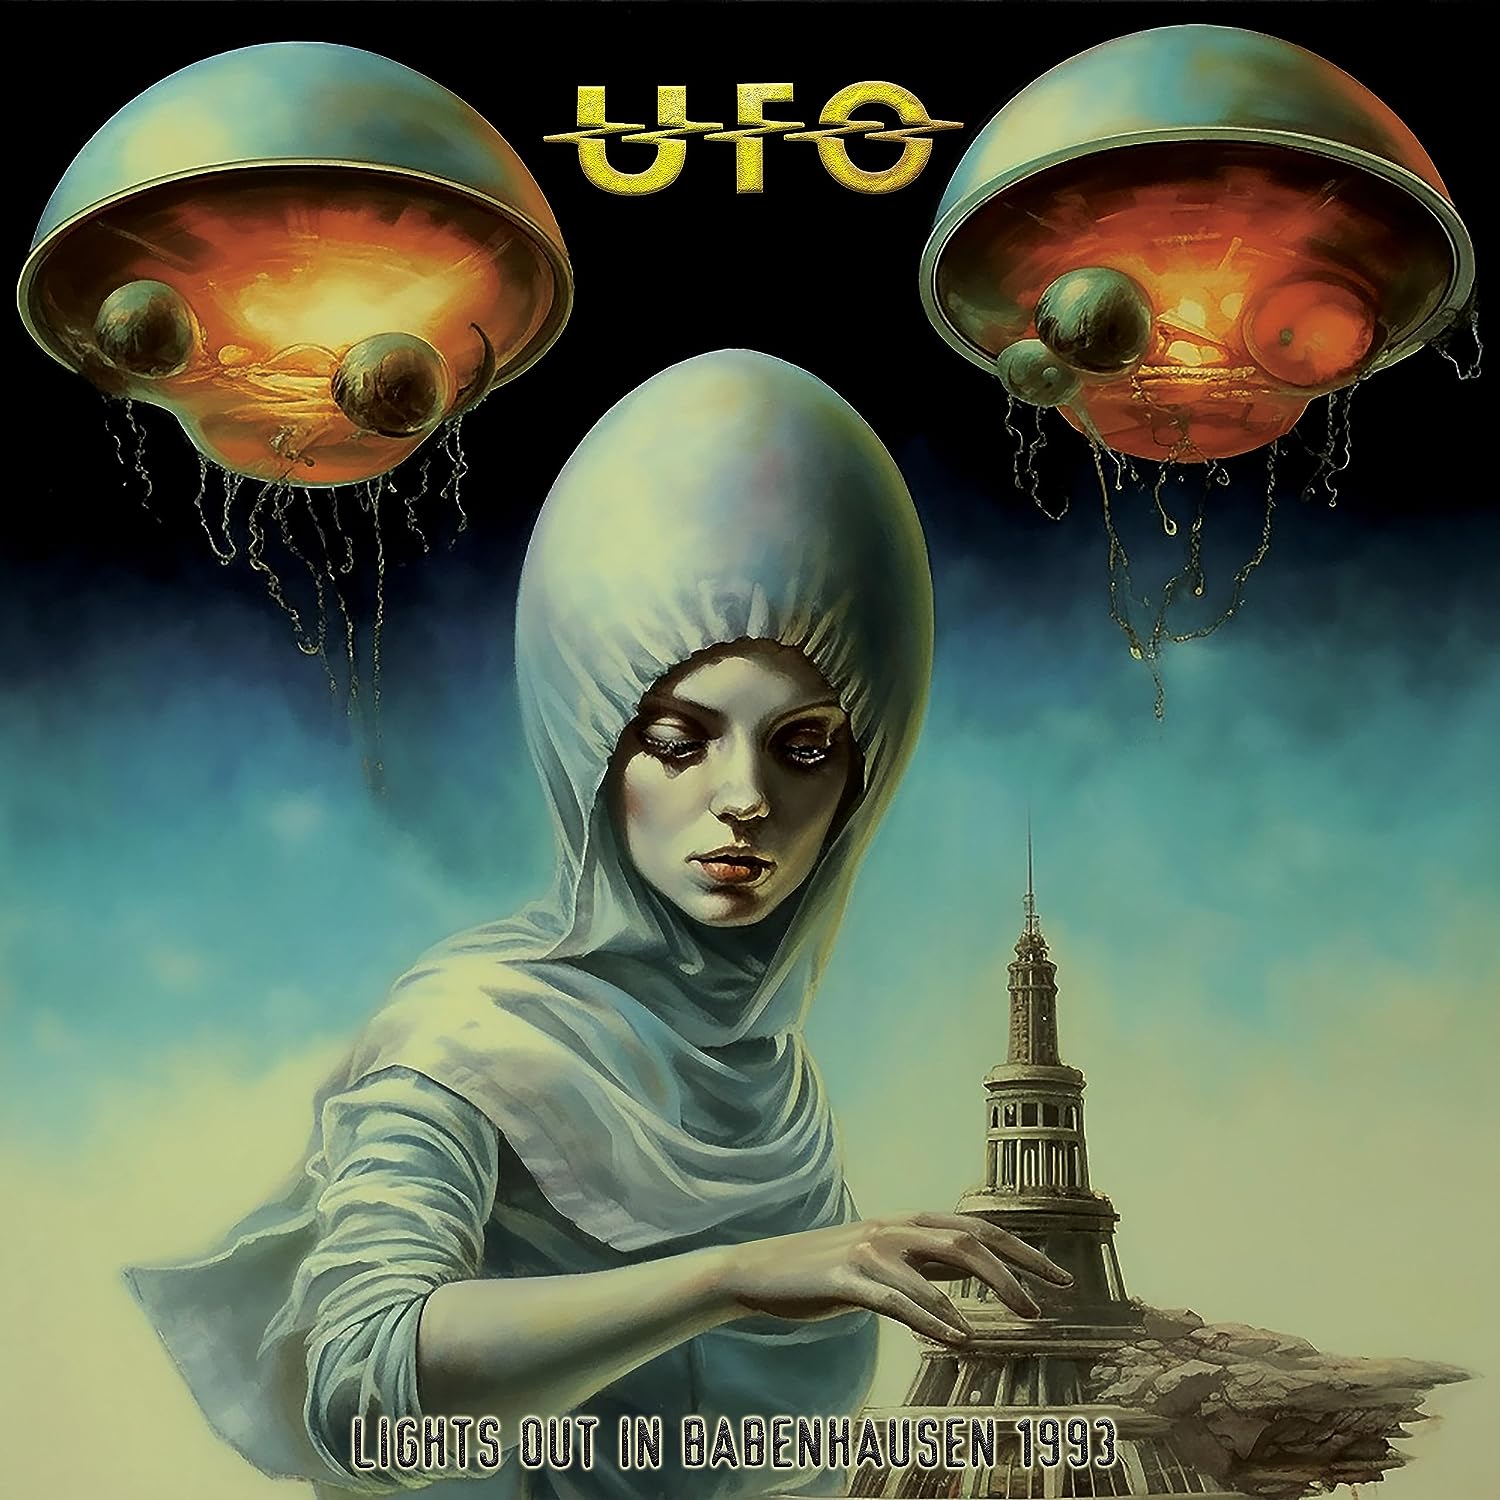 Ufo Lights Out In Babenhausen, 1993